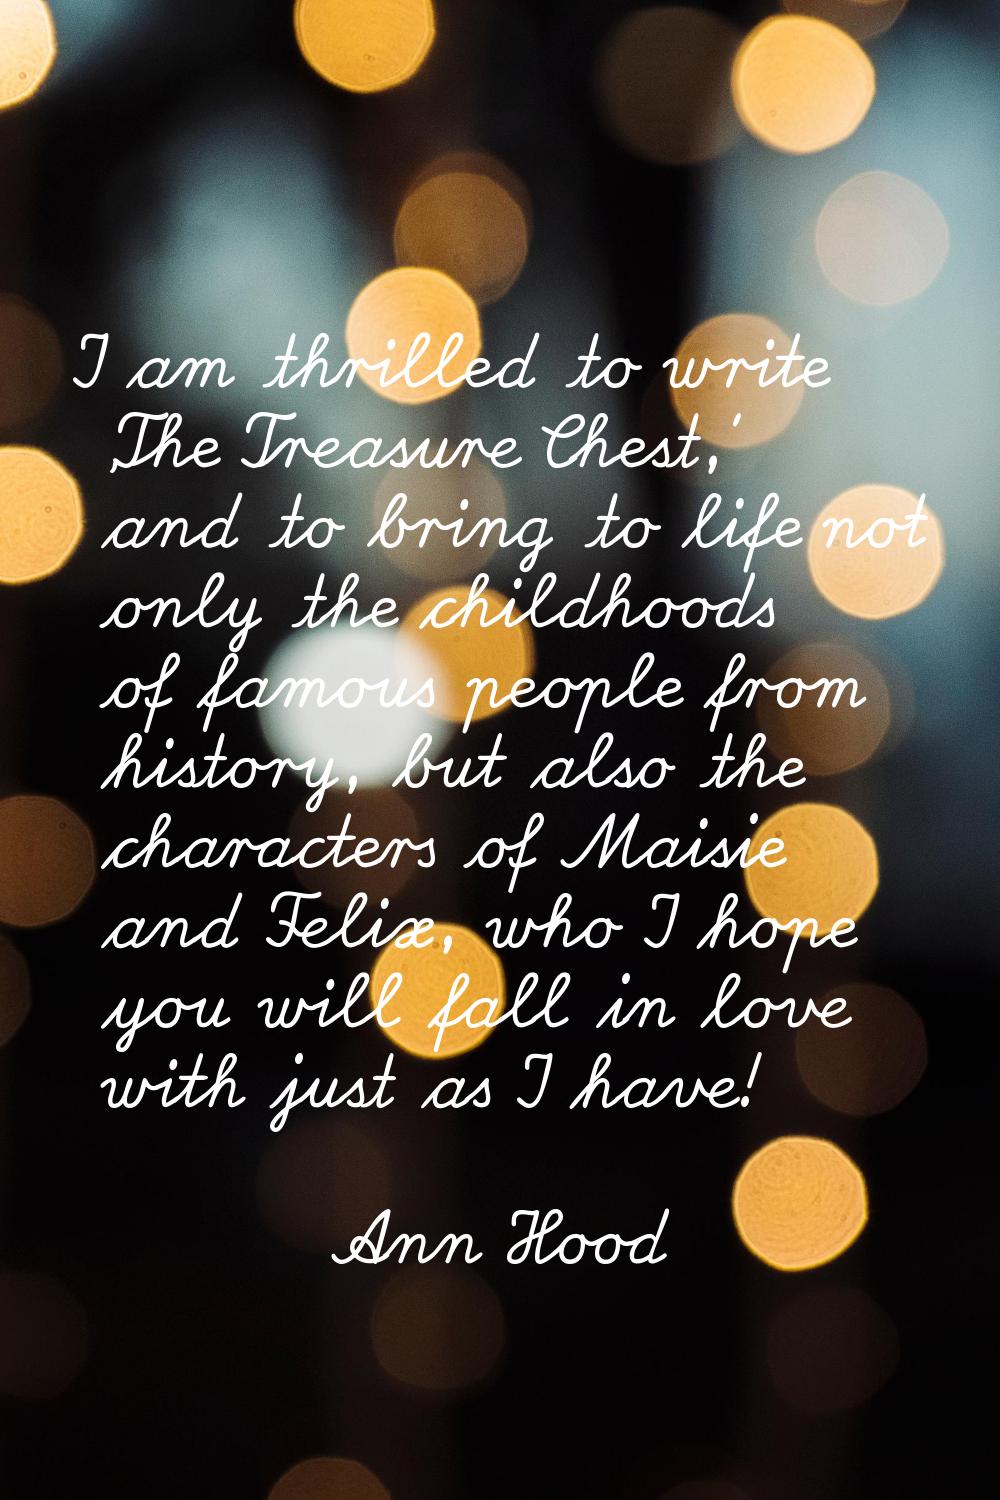 I am thrilled to write 'The Treasure Chest,' and to bring to life not only the childhoods of famous